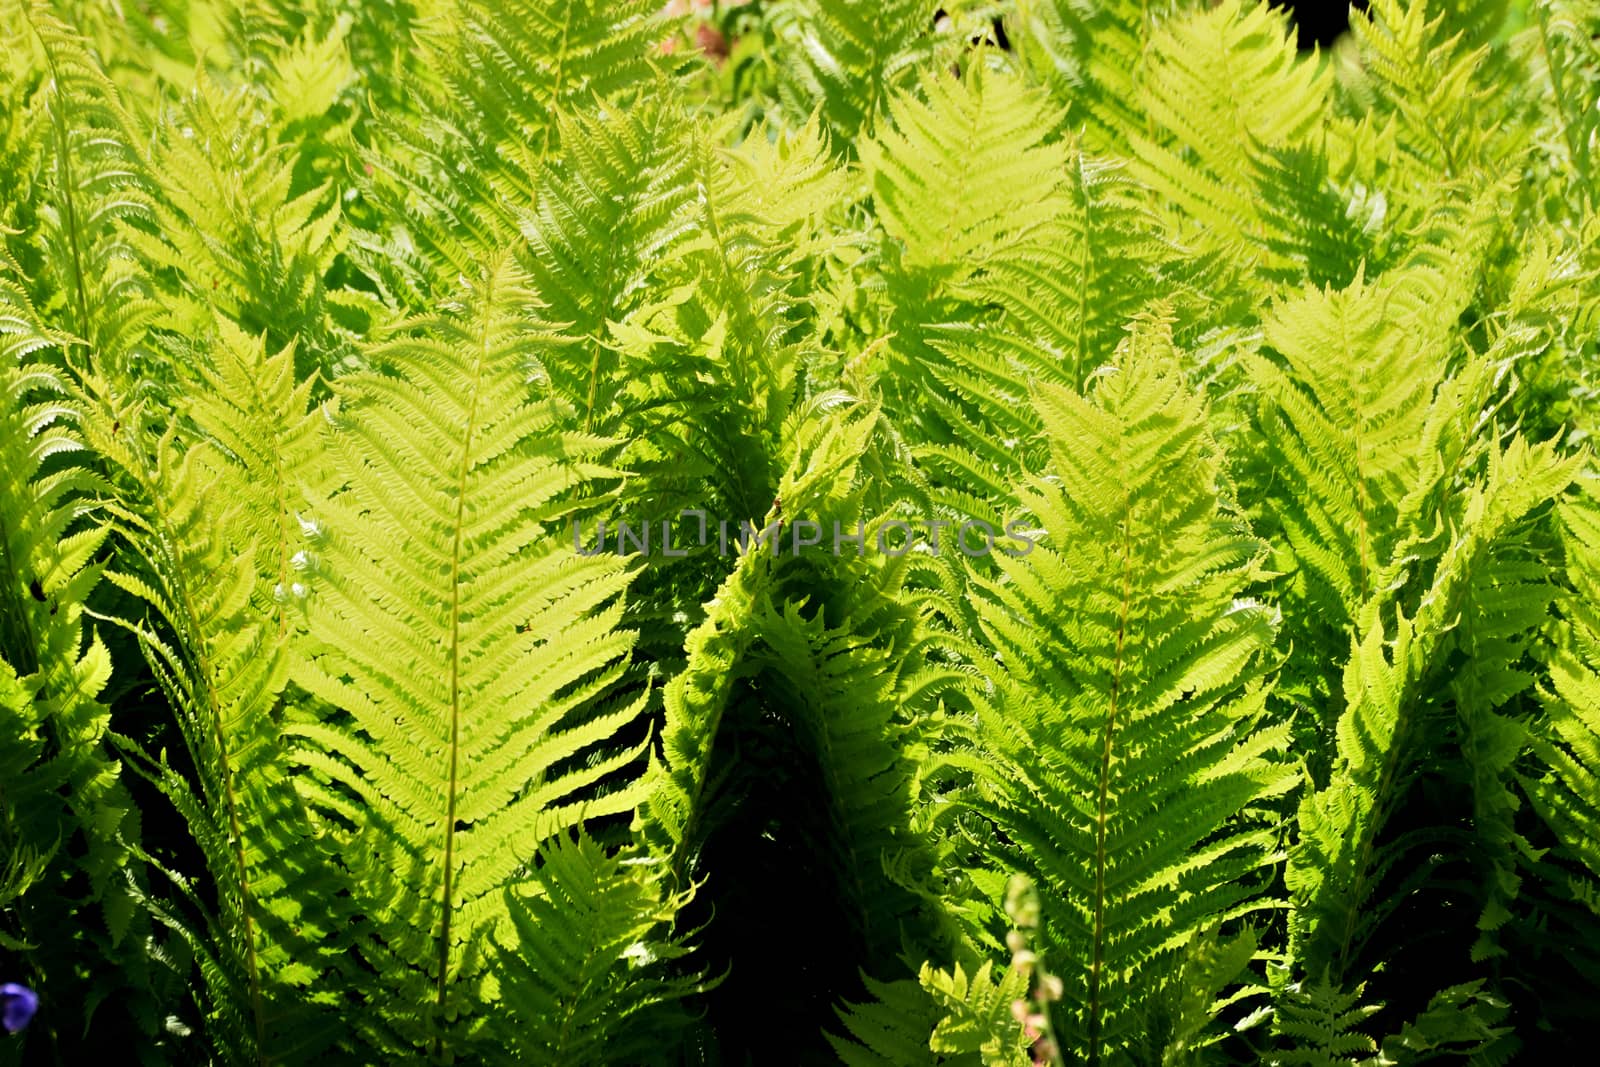 Ferns, one of the most ancient plants on the earth. Was around at the time of the Dinosaurs, millions of years in the past. Photographed "Contra Jour" for dramatic effect.